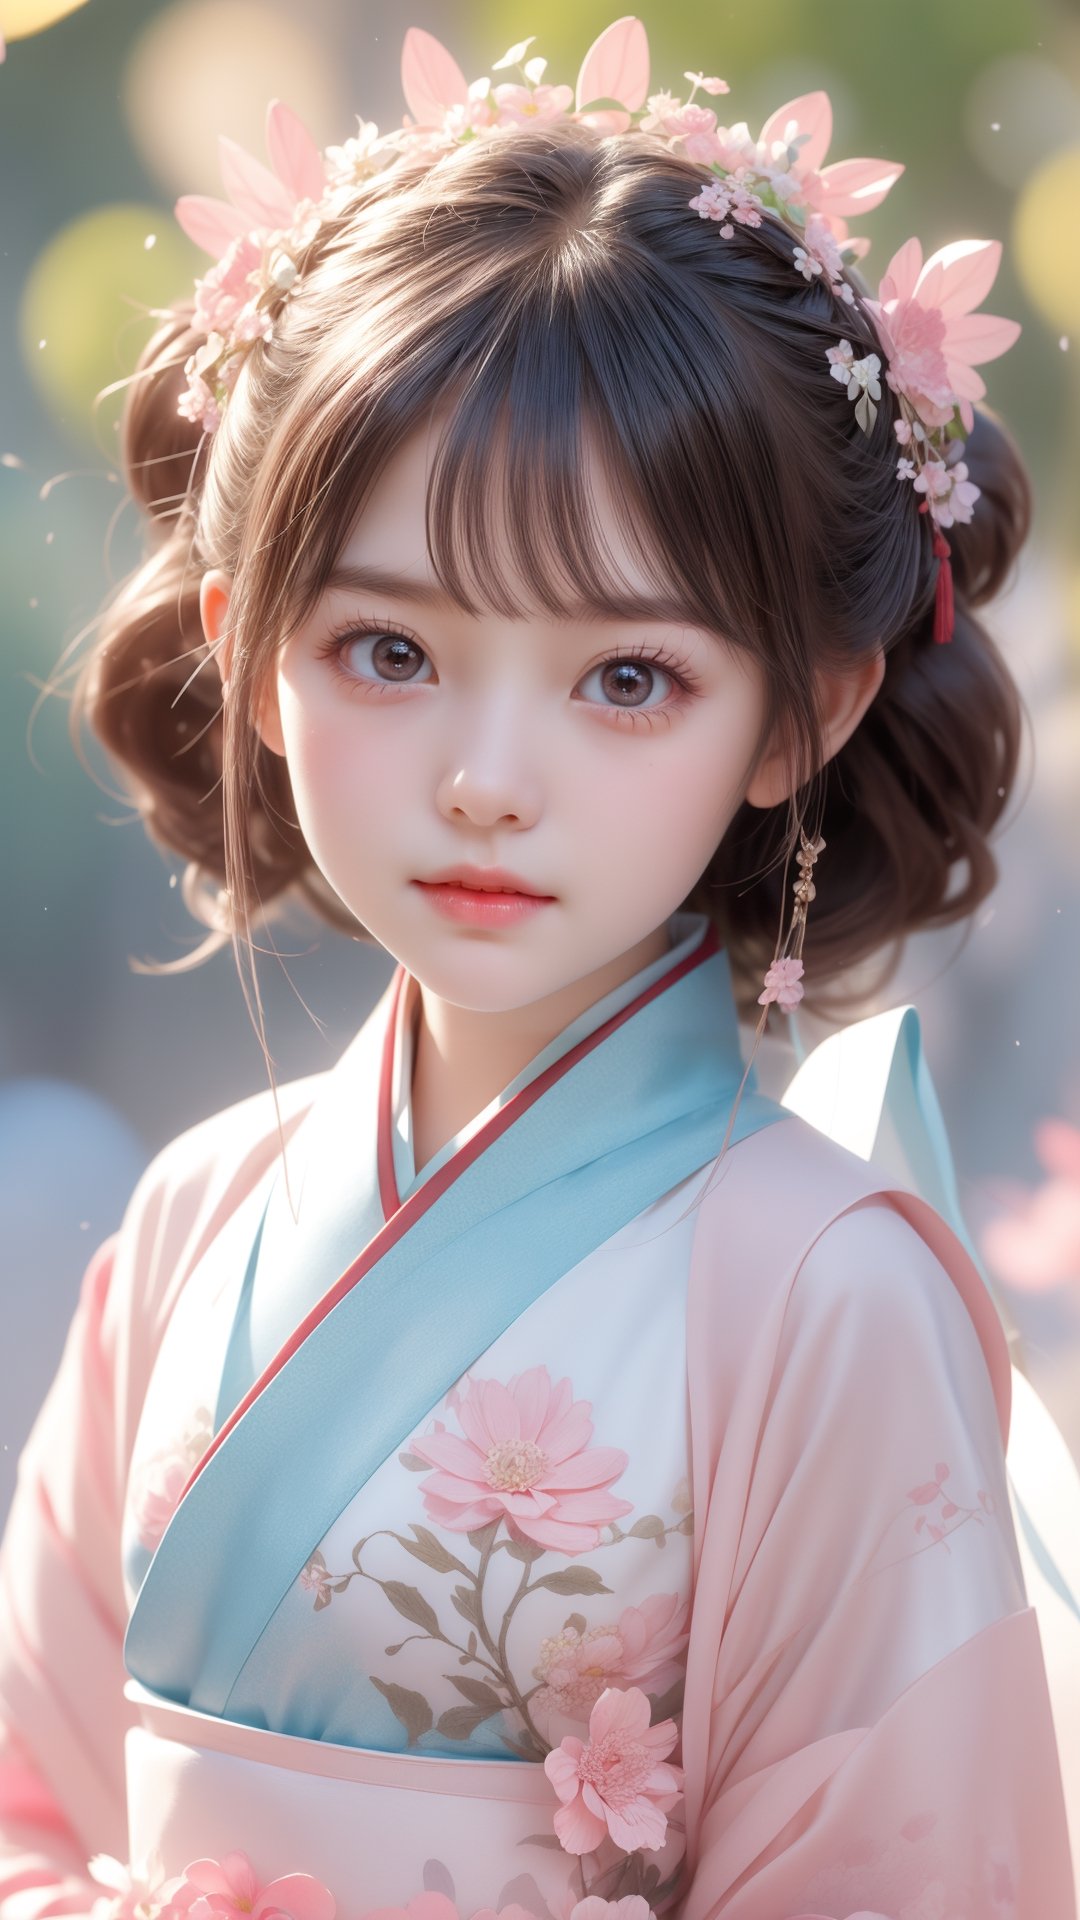 The flowers are blooming, and a five-year-old girl is wearing a light pink Hanfu. She is very cute and has a cute and beautiful round face. Pixar animated movie, flowers bloom bokeh background.